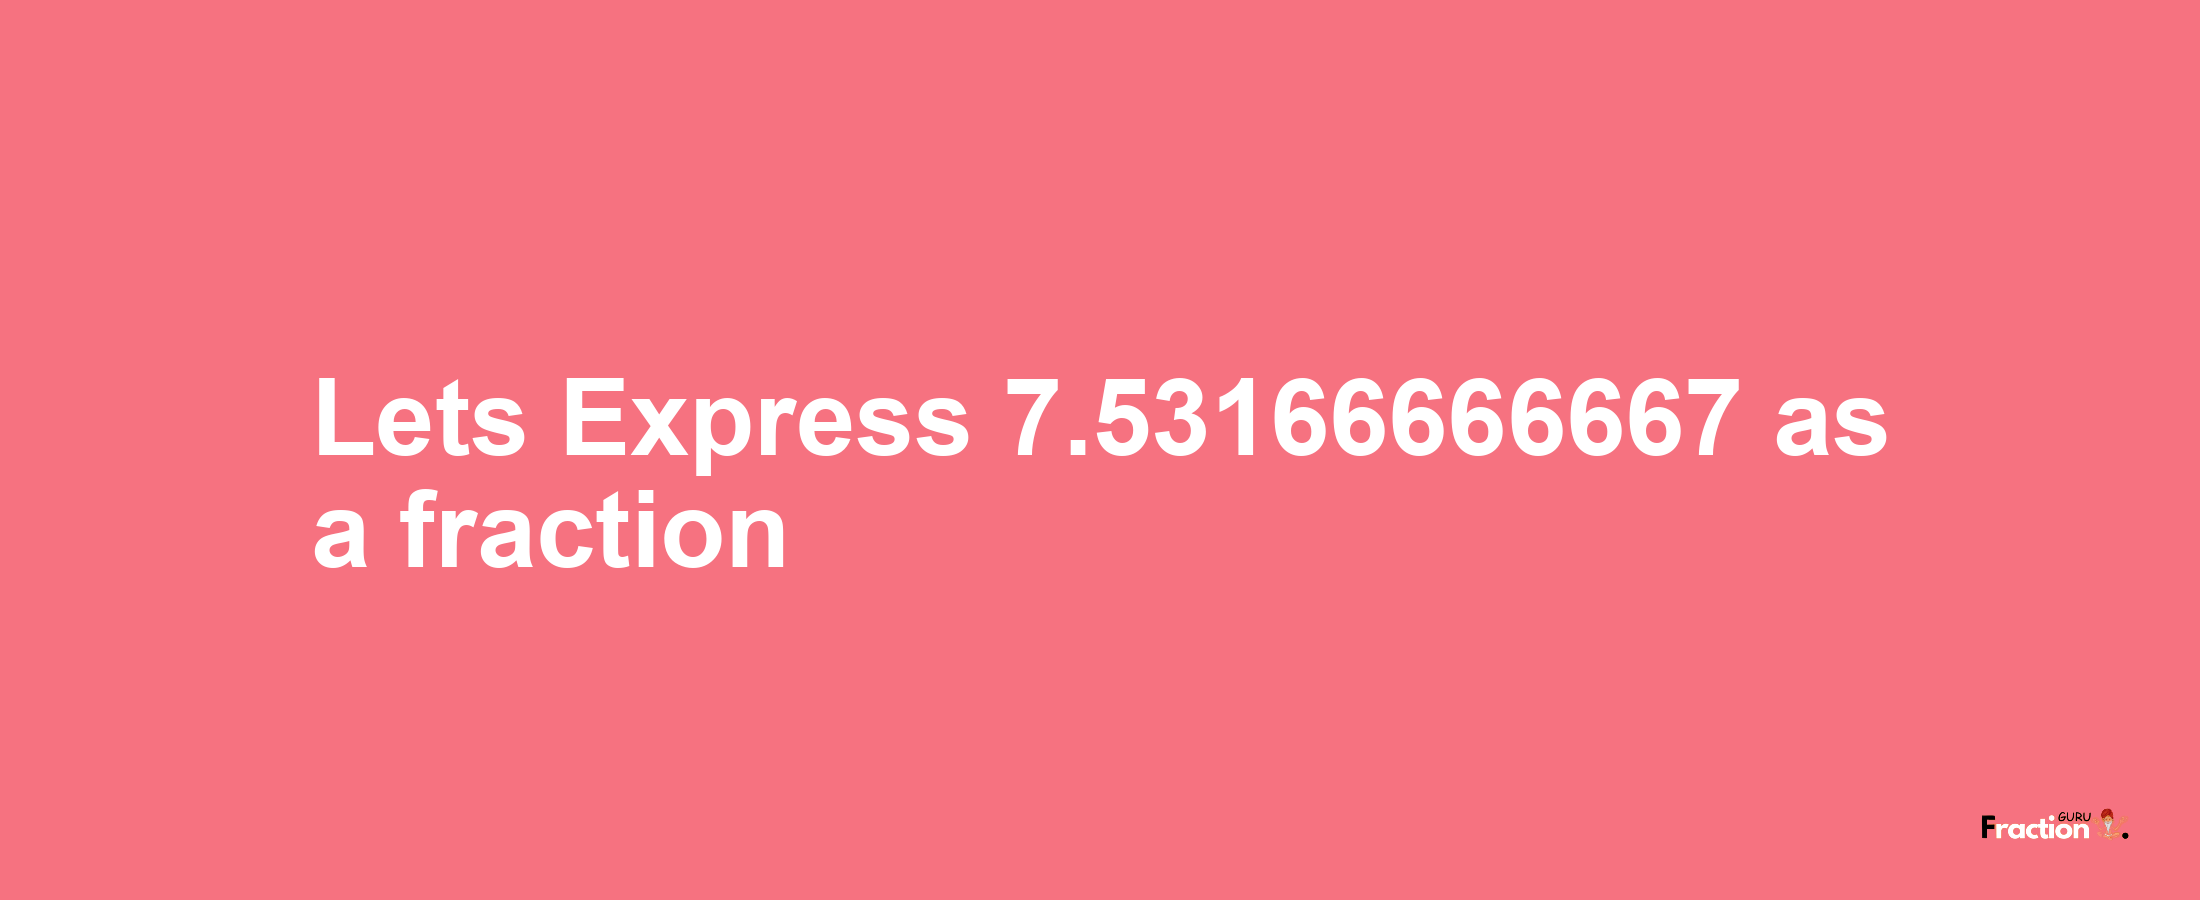 Lets Express 7.53166666667 as afraction